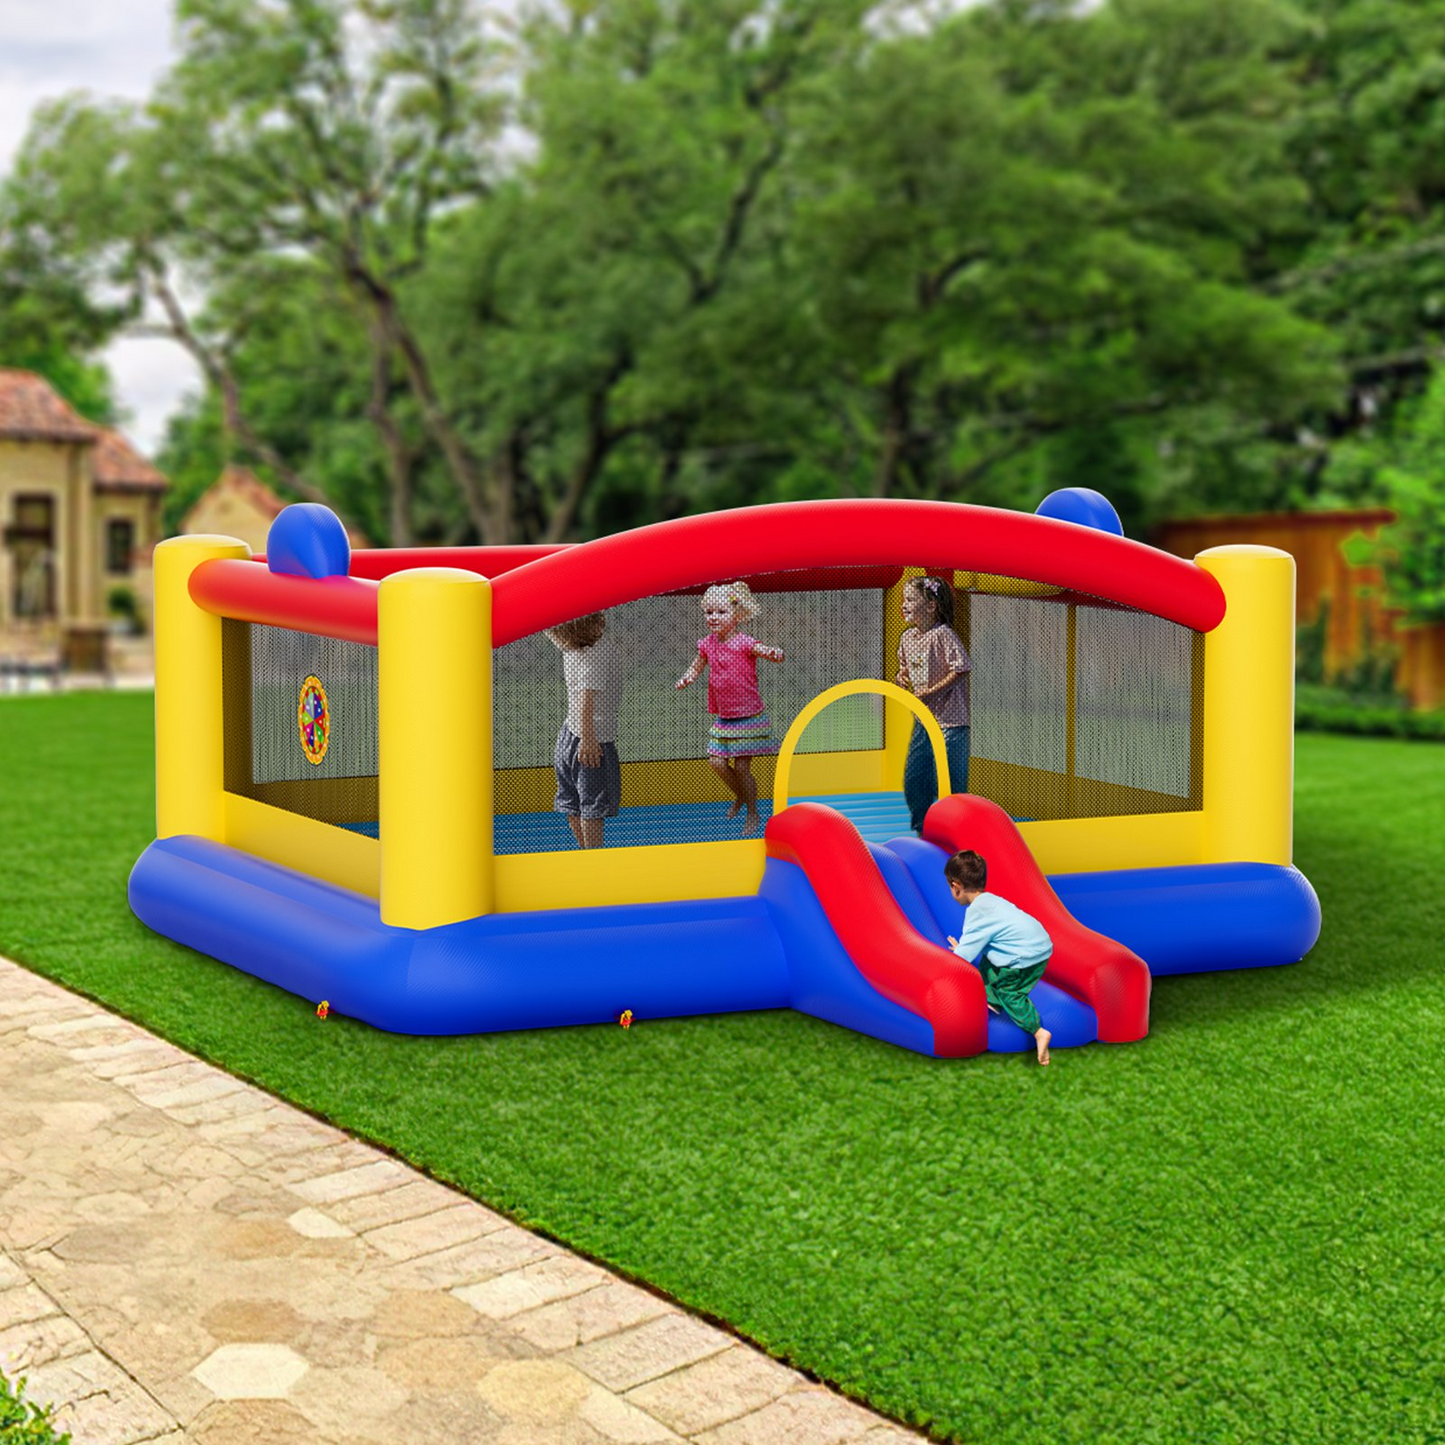 VEVOR Inflatable Bounce House | Outdoor High Quality Playhouse Trampoline with Slide and Blower | Family Backyard Bouncy Castle for Kids Ages 3-10 | 177x173x80 inch, Goodies N Stuff